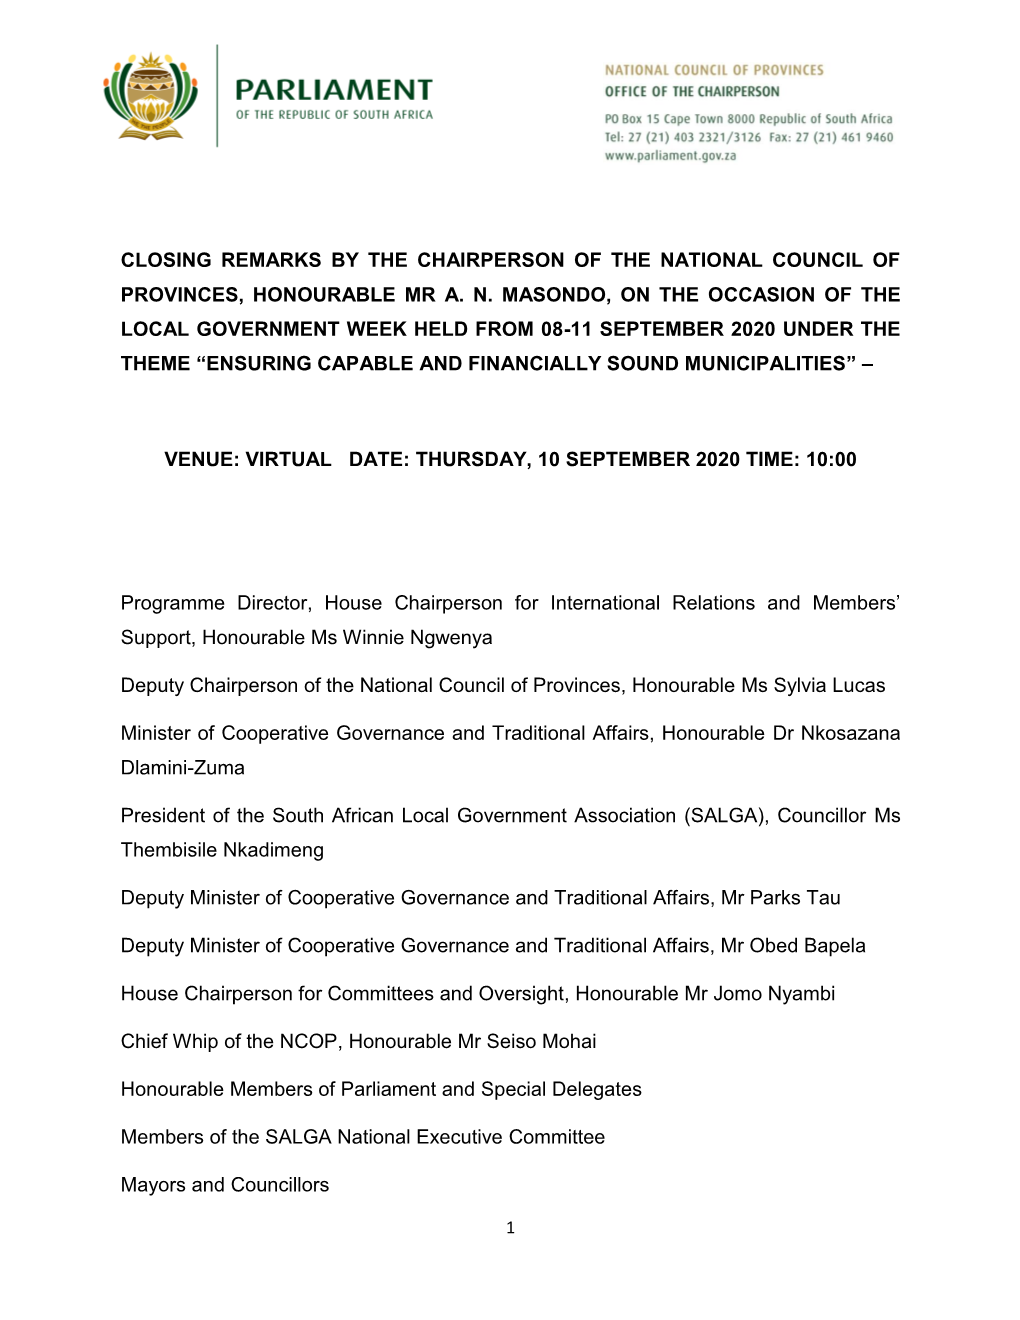 NCOP Chairperson LGW 2020 Closing Remarks 10 September 2020